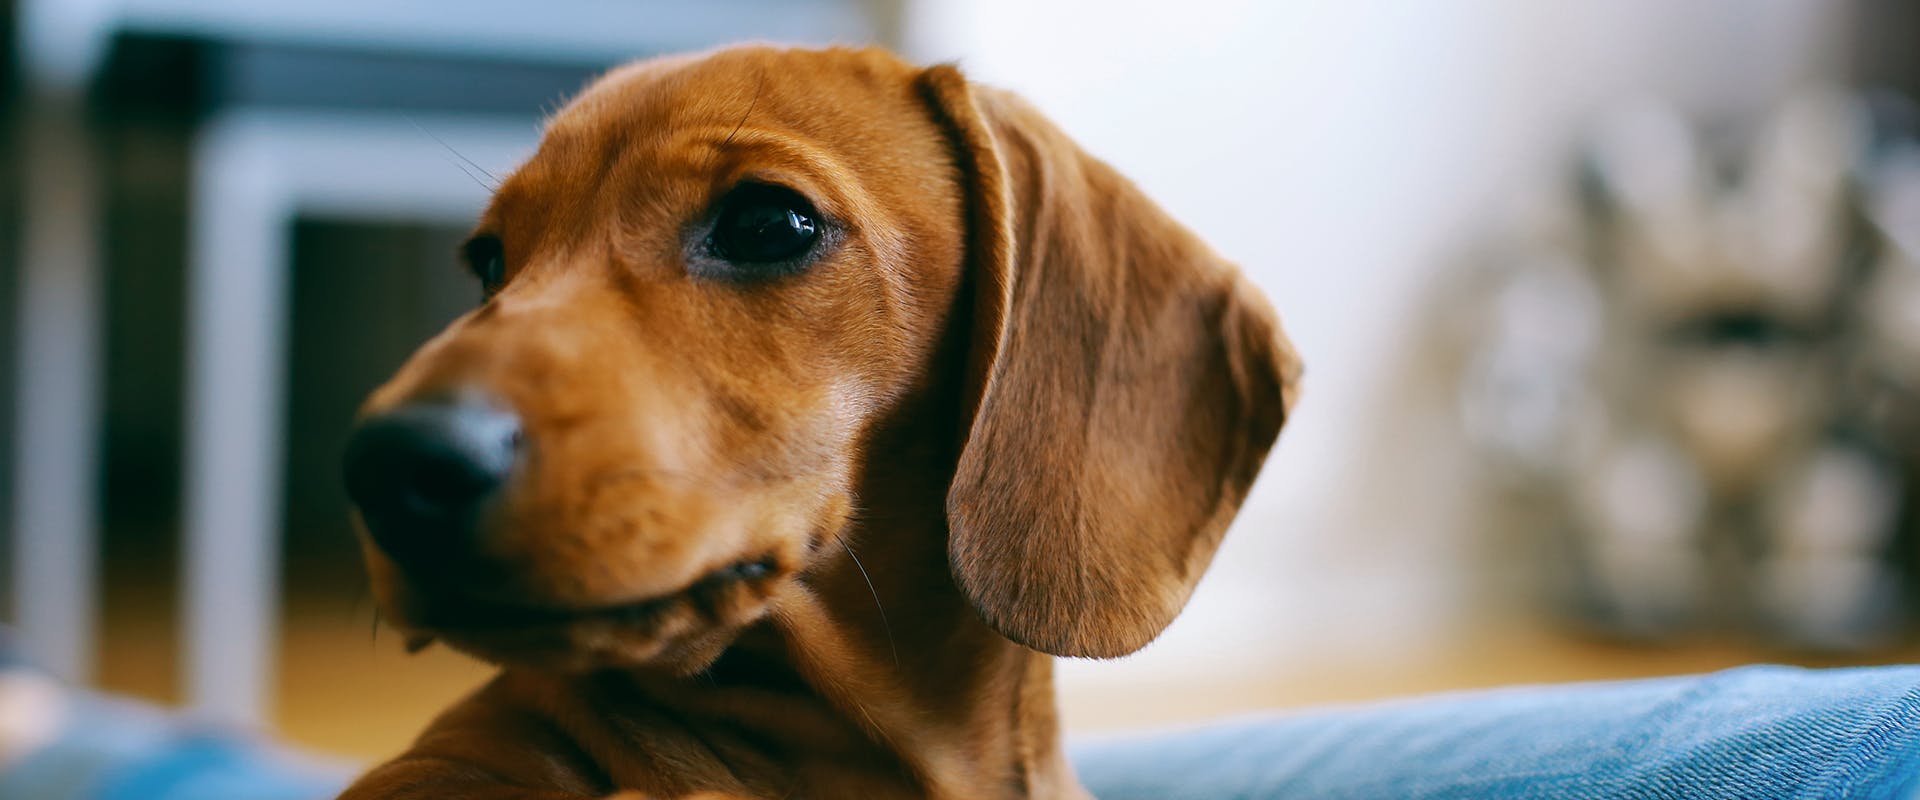 A brown Dachshund dog looking away, his head pointed towards the left